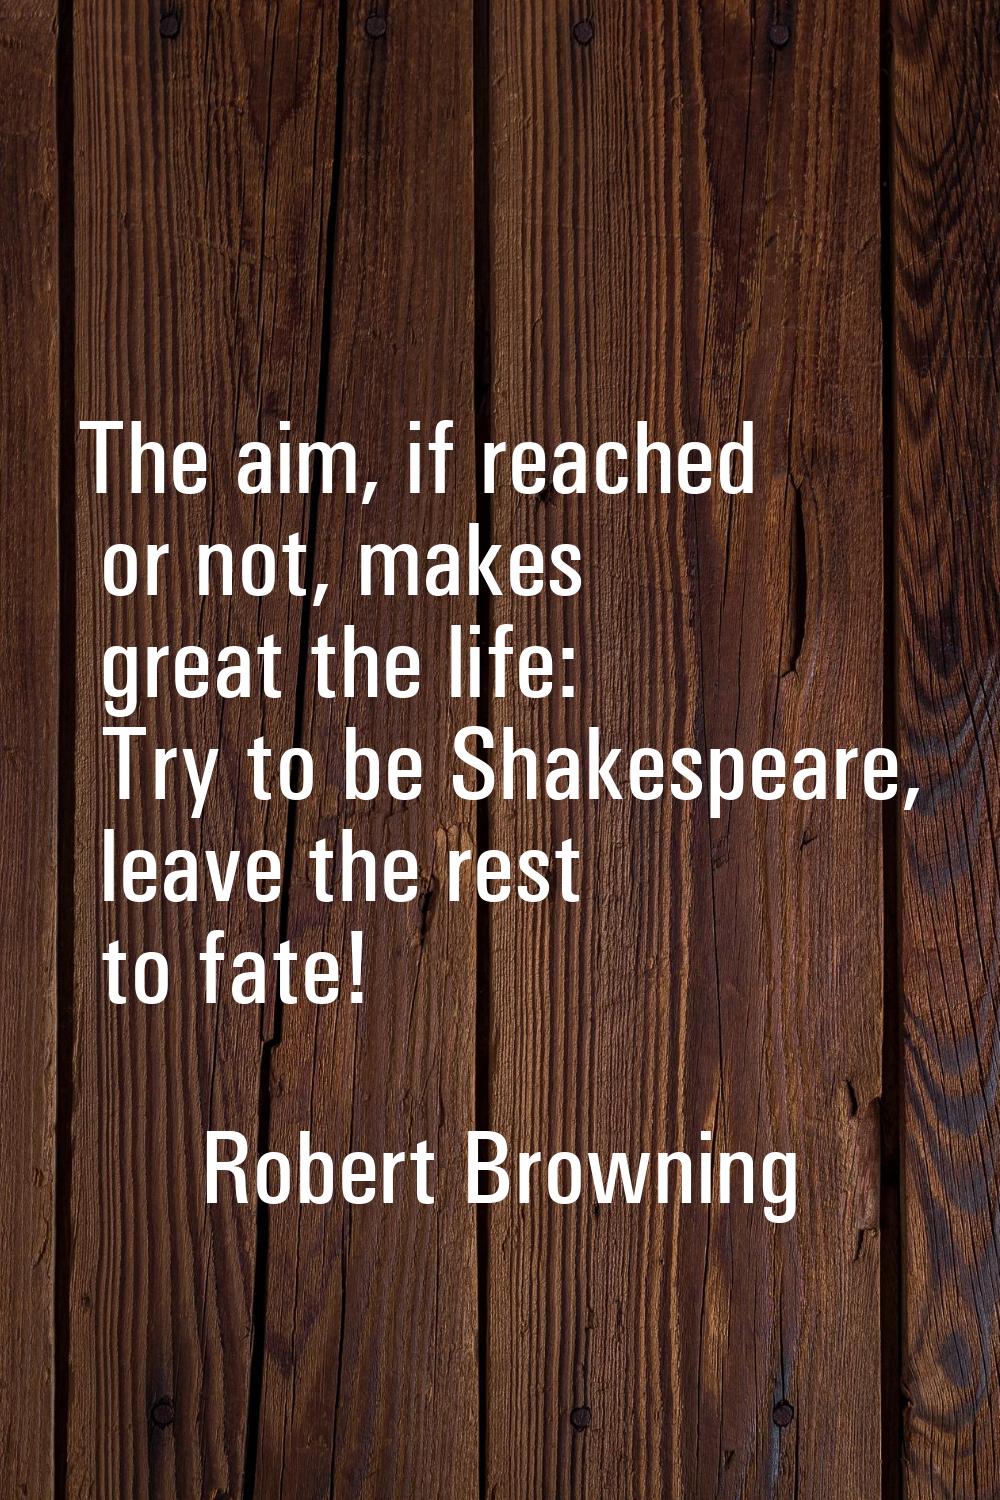 The aim, if reached or not, makes great the life: Try to be Shakespeare, leave the rest to fate!